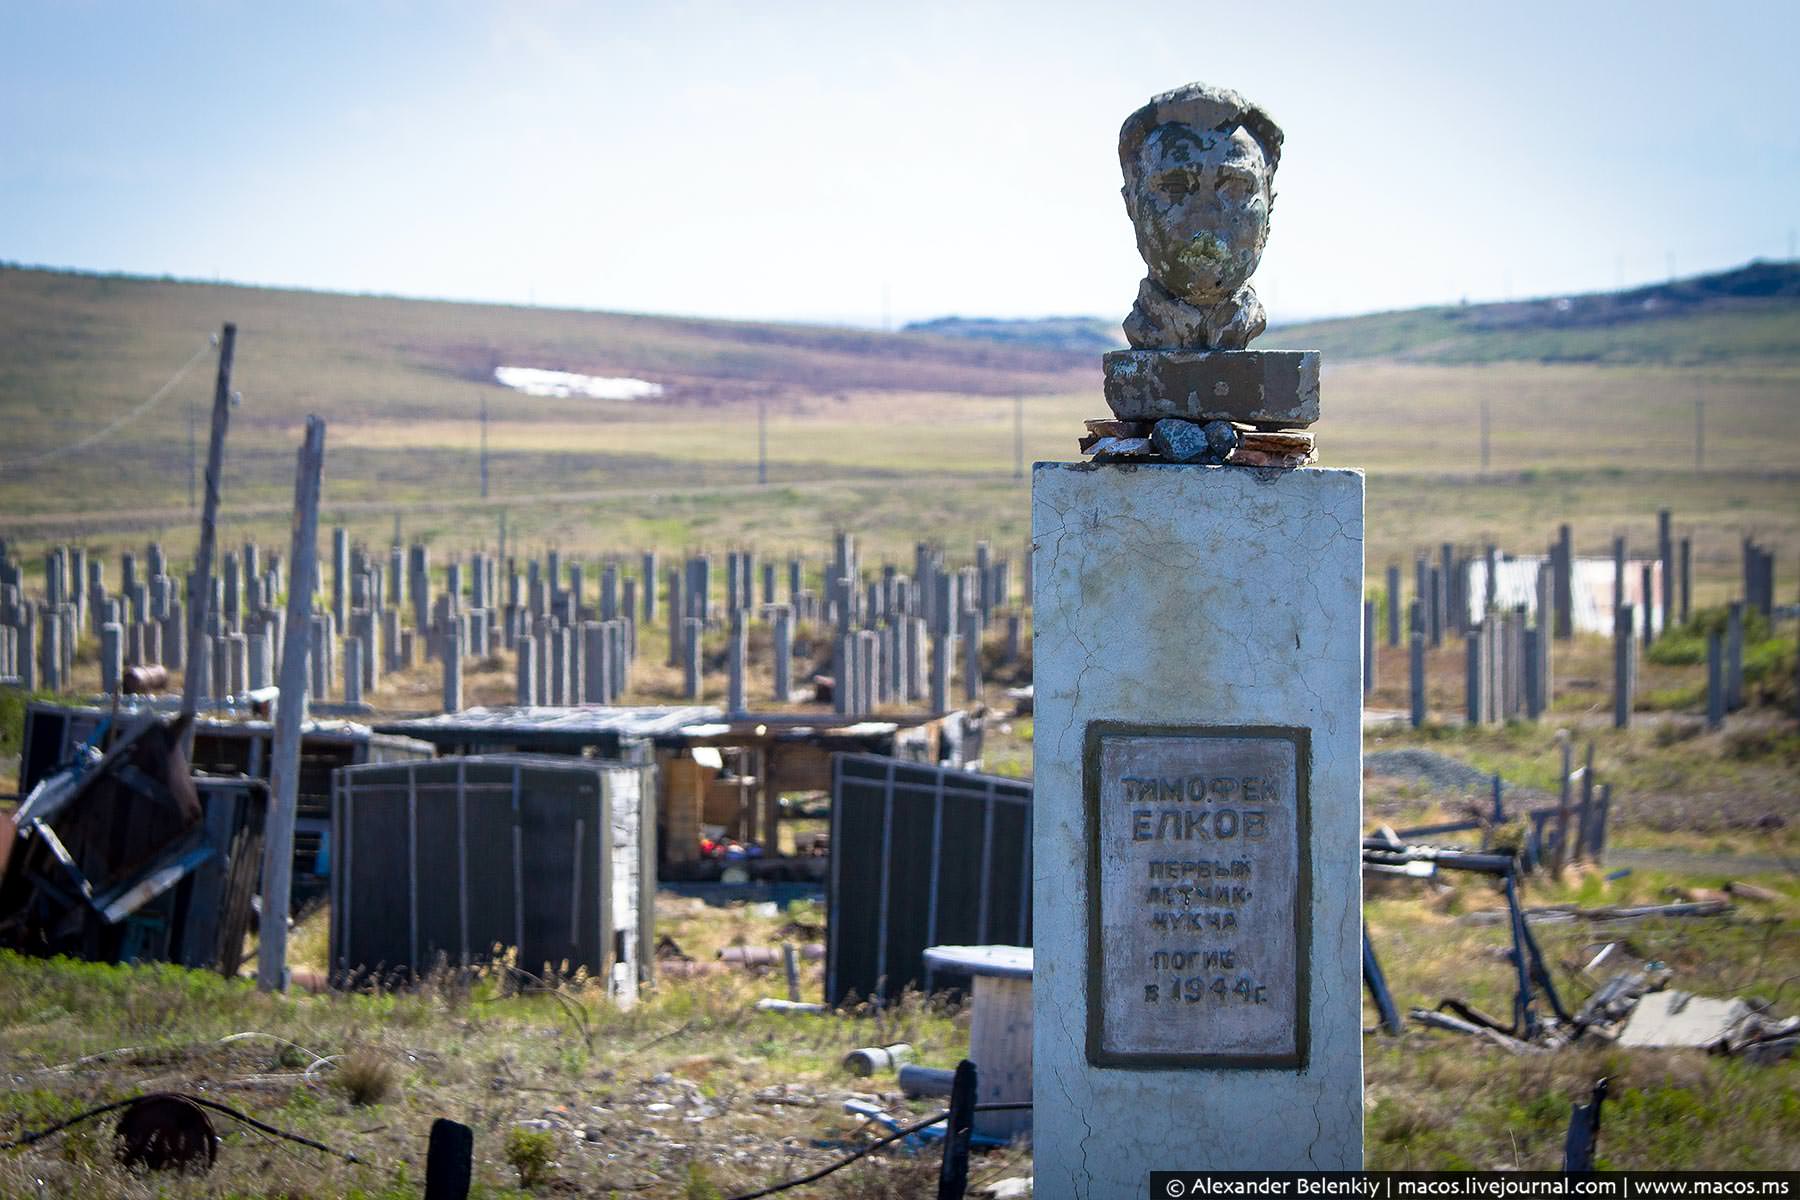 Only piles used to build in permafrost and shacks remain of a town in Russia's Chukotka Peninsula across the strait from Alaska. The now decaying monument was built to honor Timofey Yelkov, the first Chukcha pilot, who was killed in World War II (Image: Alexander Belenkiy / macos.ms)